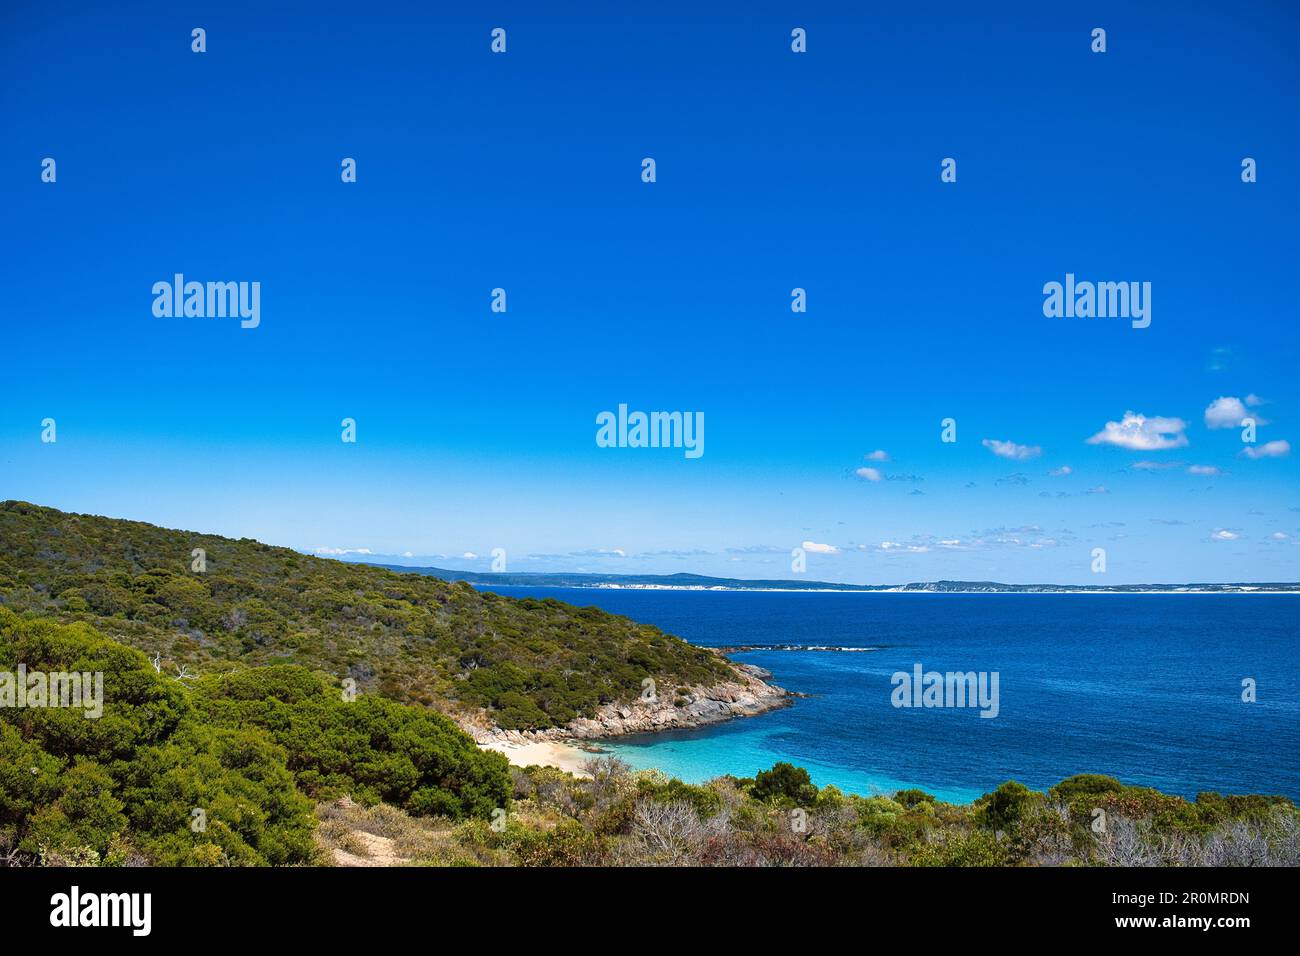 View from the hilly peninsula above Little Boat Harbour Beach near Point Henry in Bremer Bay, a remote village on the south coast of Western Australia Stock Photo